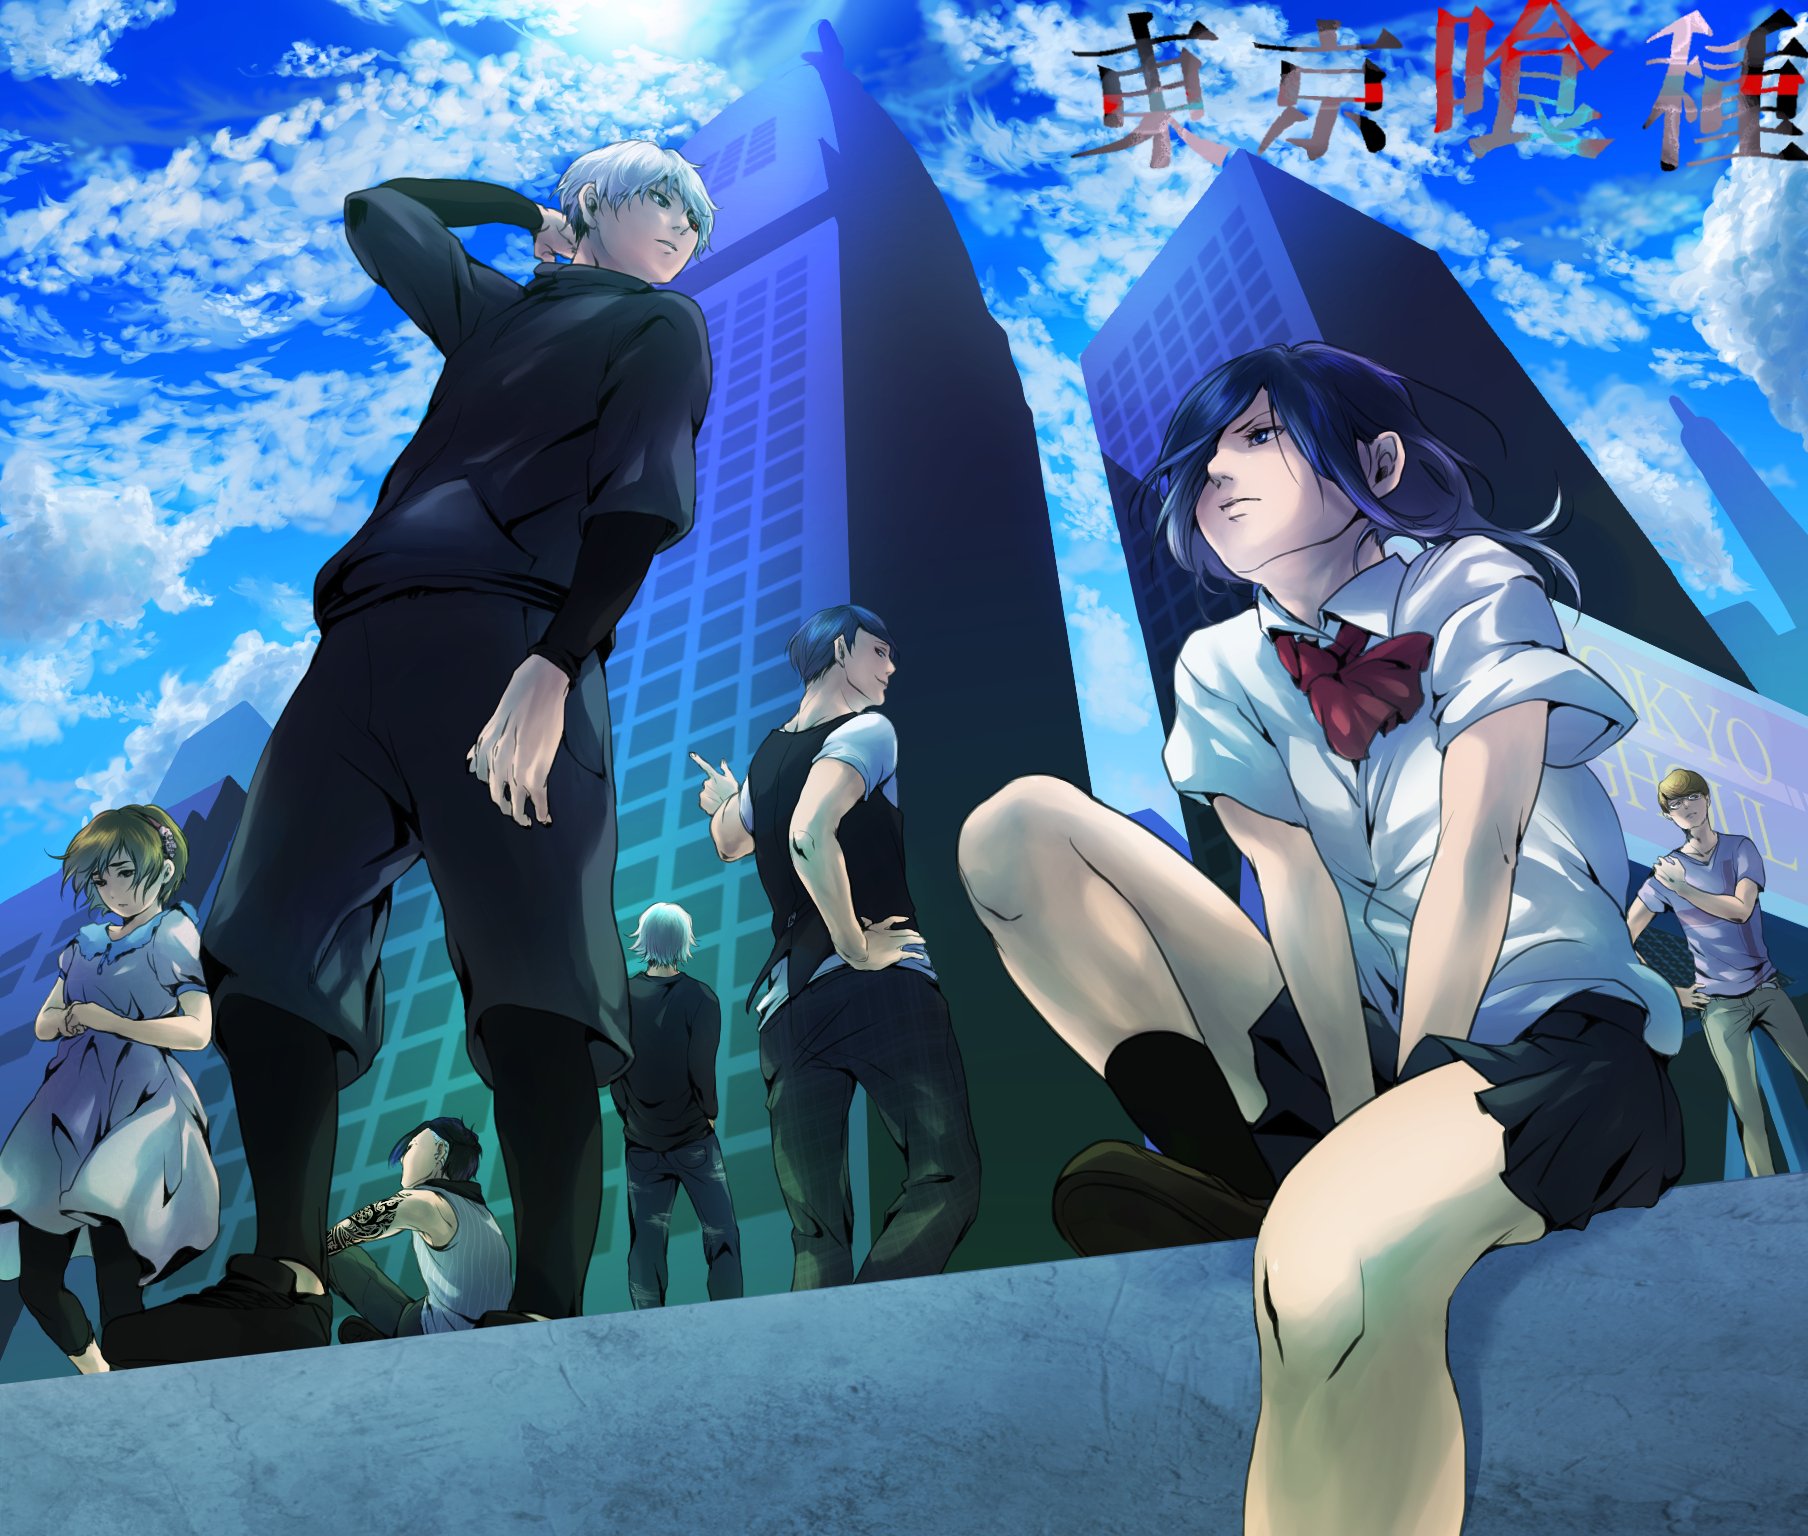 tokyo, Ghoul, Anime, Series, Characters, Clouds, Blue, Sky, Girls, Guys Wallpaper